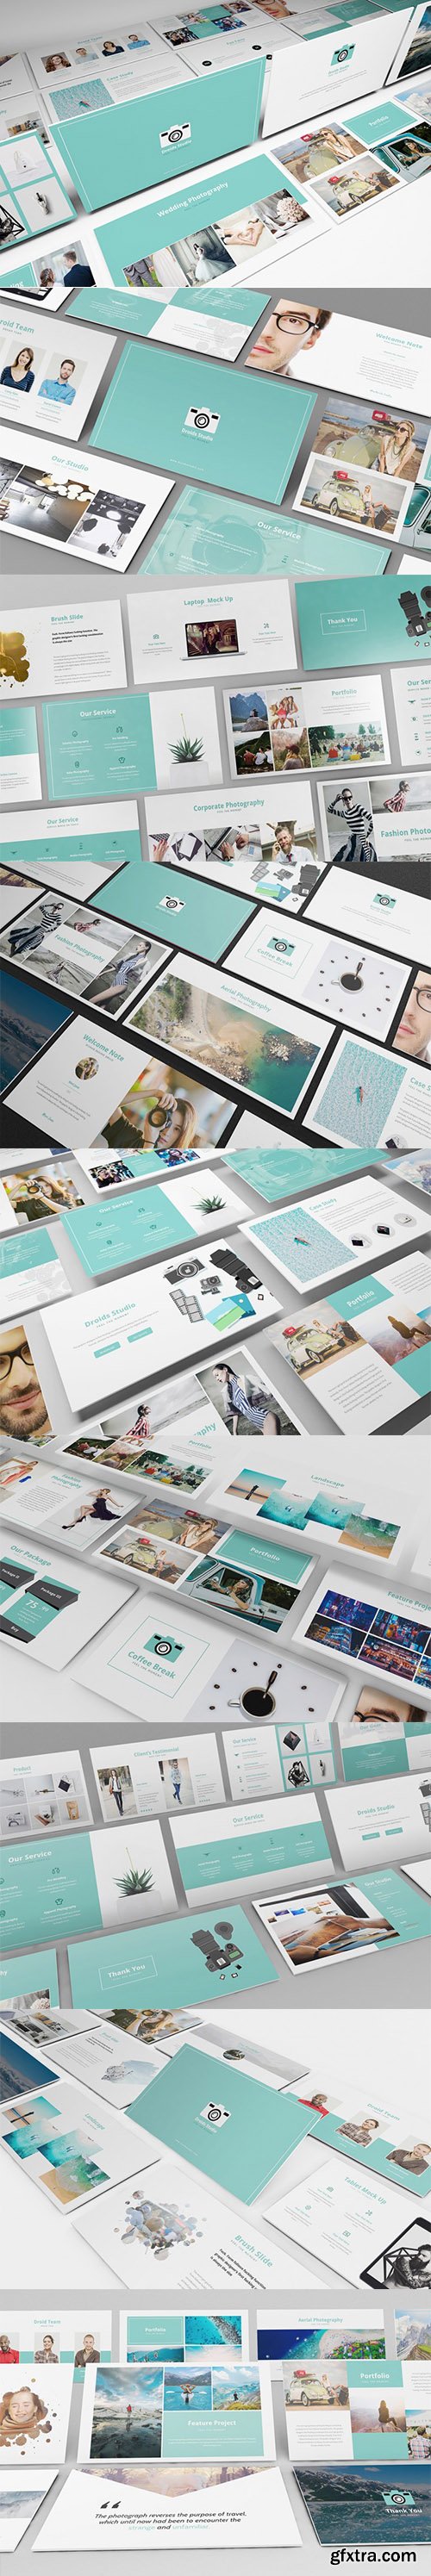 Photography Powerpoint Template GFxtra